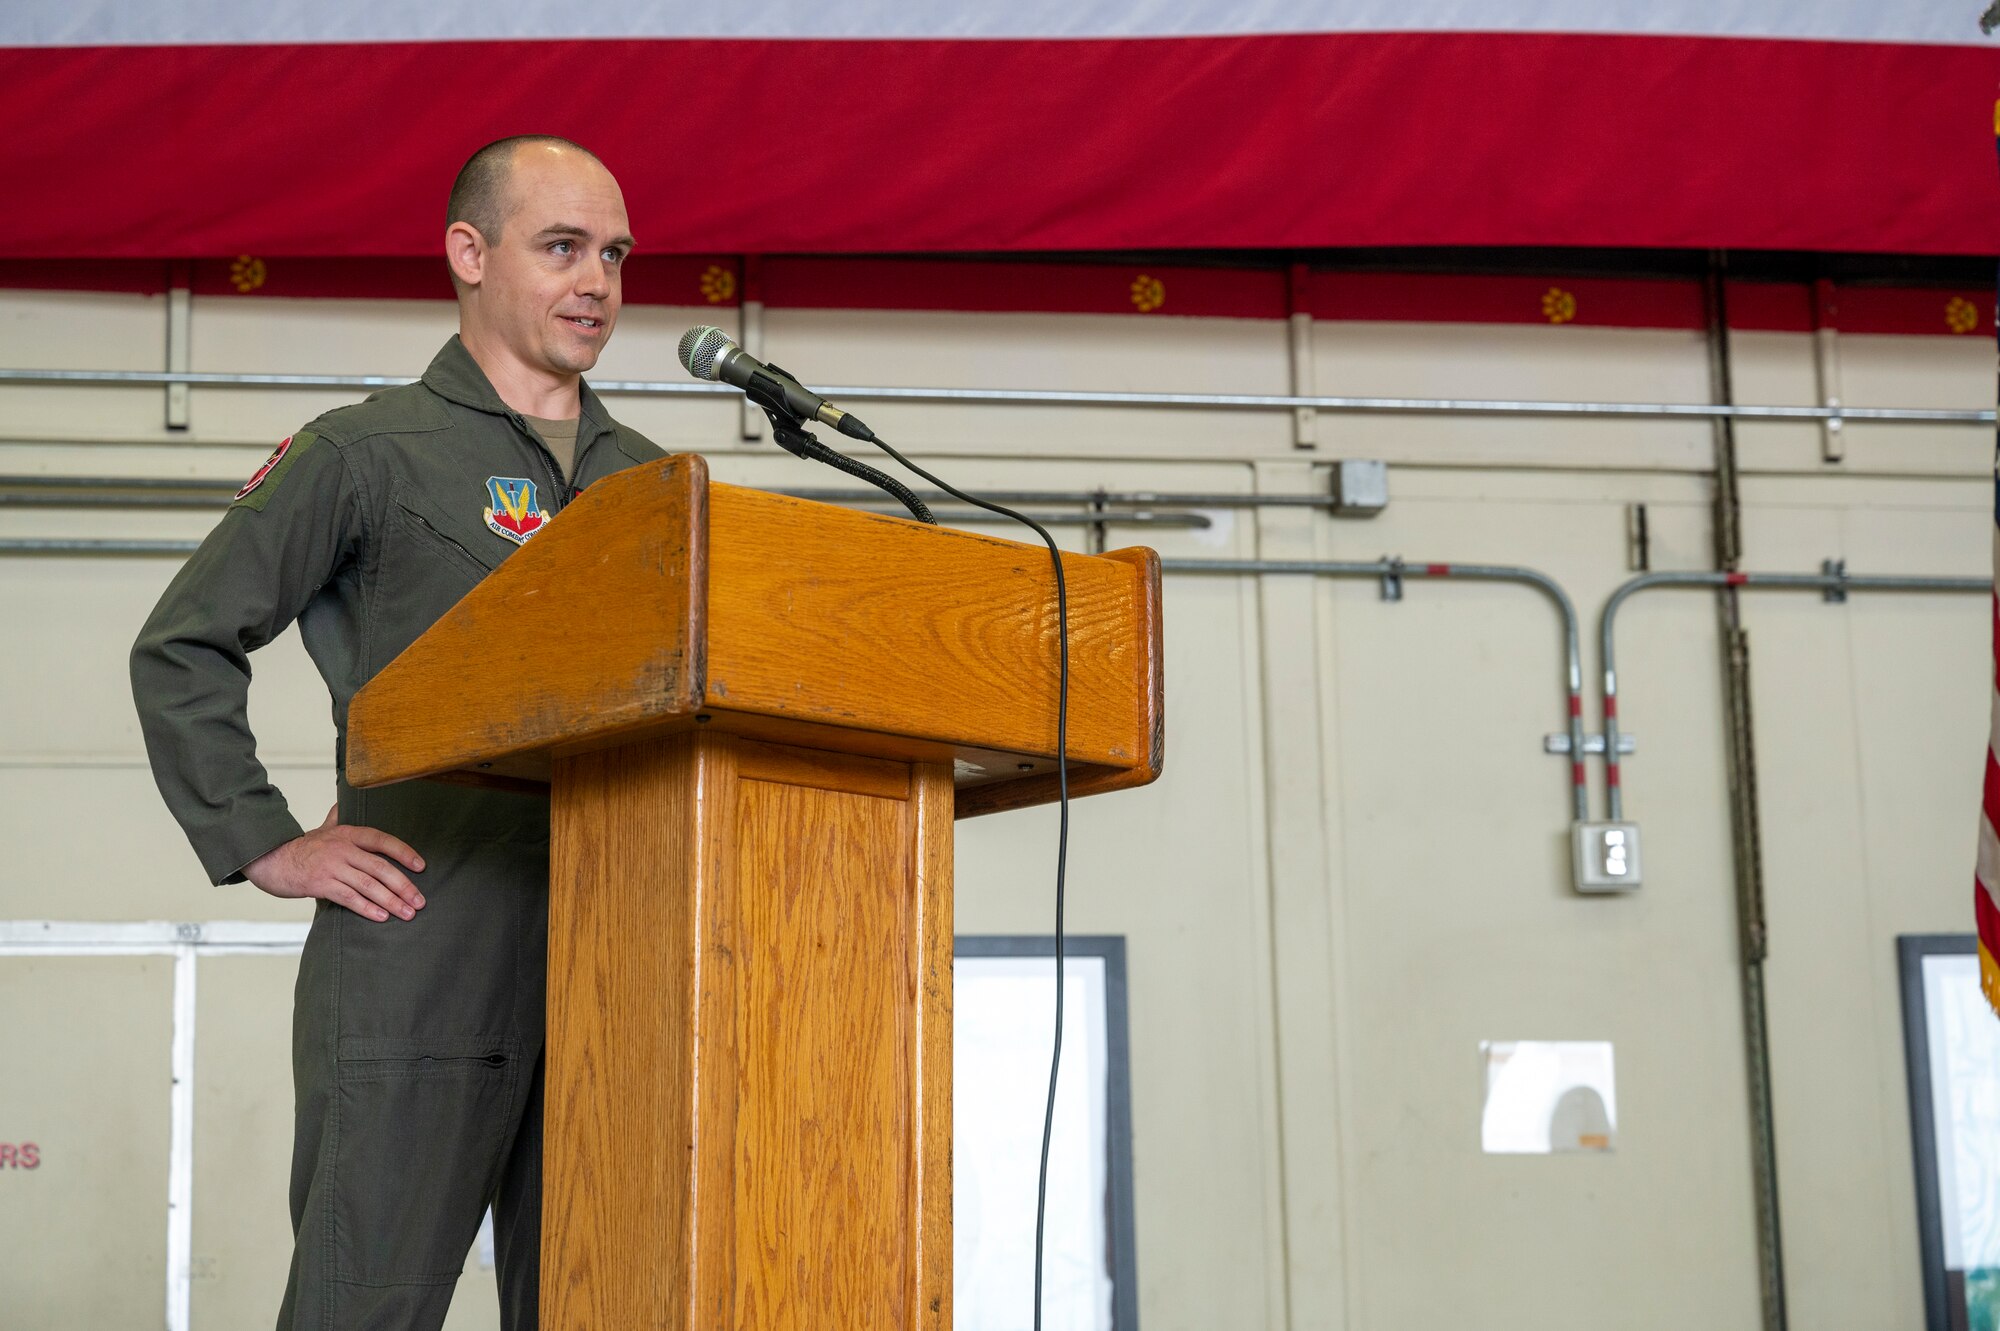 U.S. Air Force Lt. Col. Brandon Olson, 5th Reconnaissance Squadron incoming commander, gives his first speech to his squadron during the 5th RS change of command ceremony at Osan Air Base, Republic of Korea, June 2, 2023. Change of command ceremonies are time-honored traditions deeply-rooted in U.S.military history. (U.S. Air Force photo by Airman 1st Class Aaron Edwards)